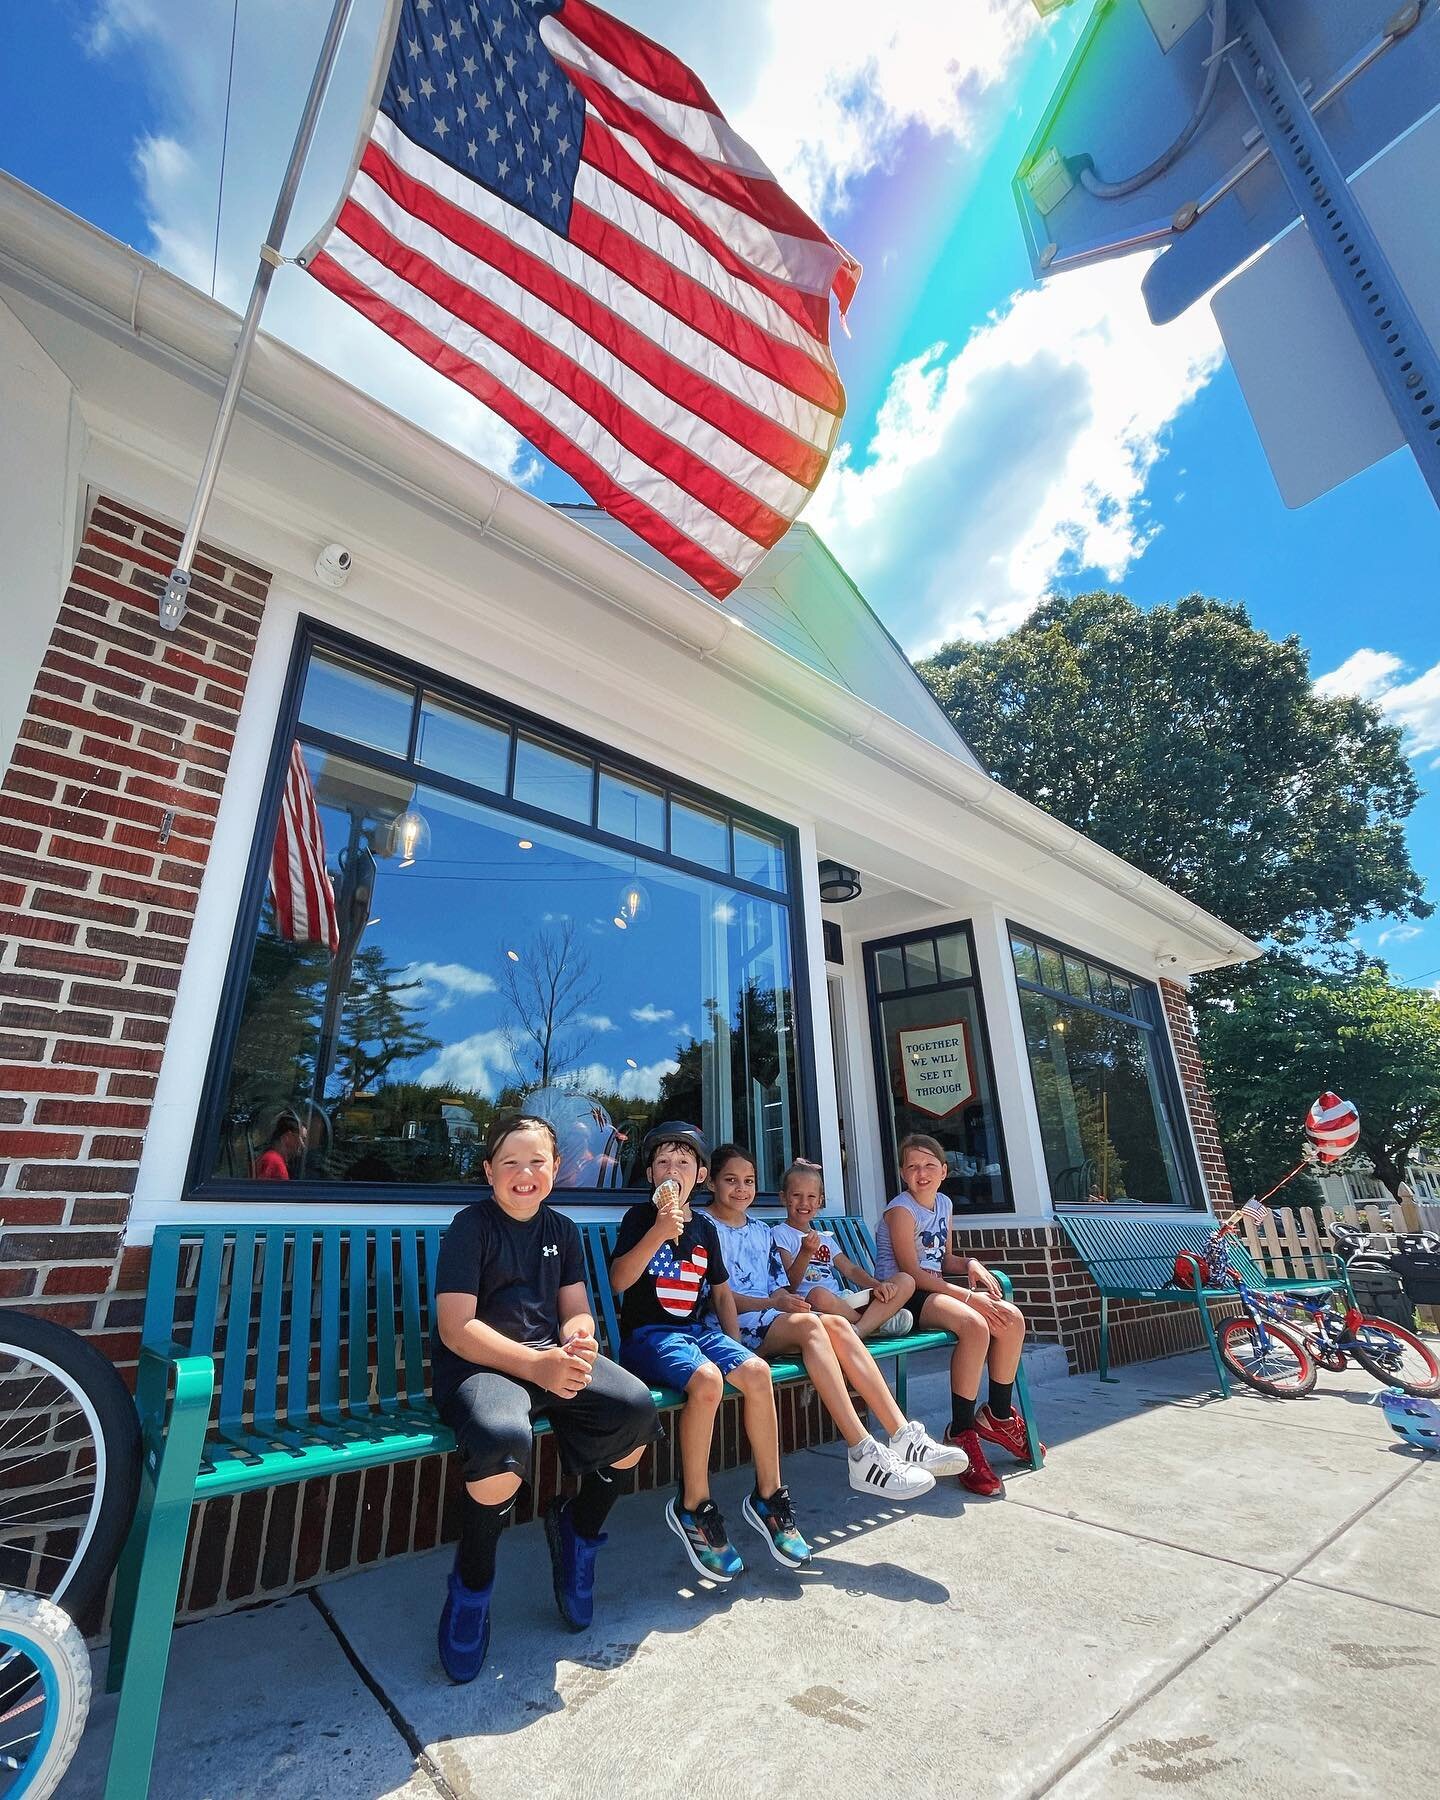 🇺🇸 We hope everyone has a safe and happy 4th of July! Thank you to all of our customers who made our morning so special 💗🚲 🌞we will be closed for the rest of the day to celebrate - see you on Tuesday! #coffeecreamcommunity #jessiesoflinwood
.
.
